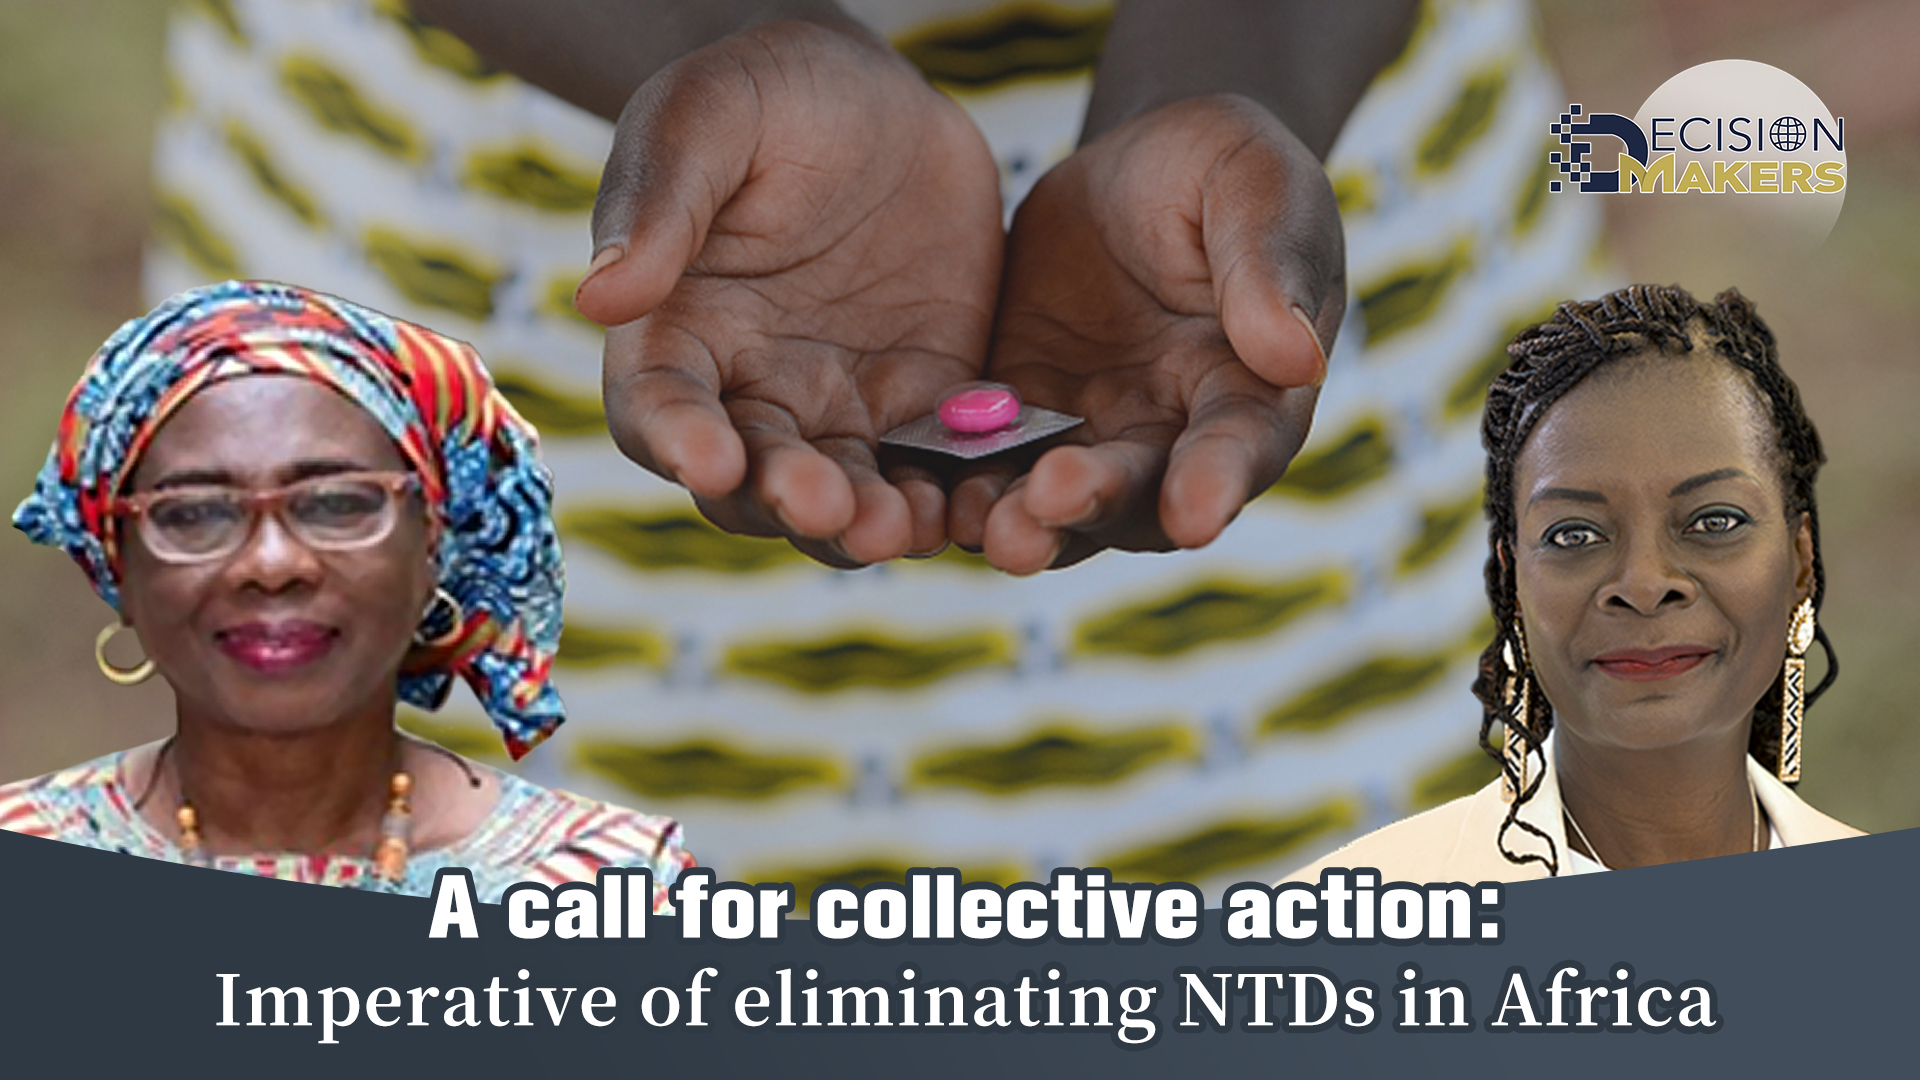 A call for collective action: Imperative of eliminating NTDs in Africa